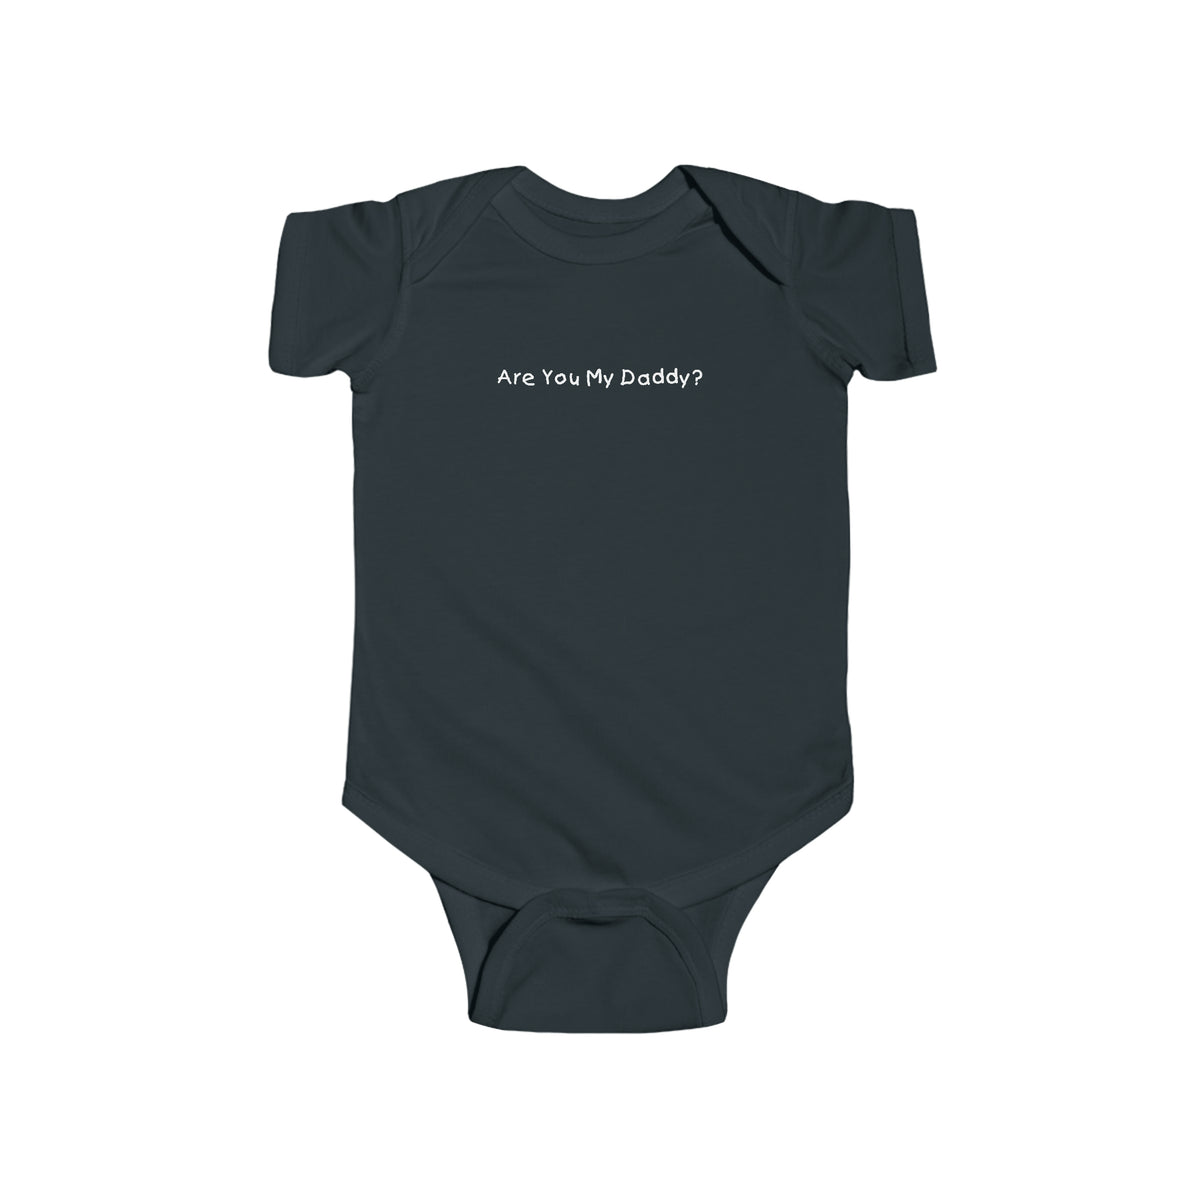 Are You My Daddy? - Baby Onesie